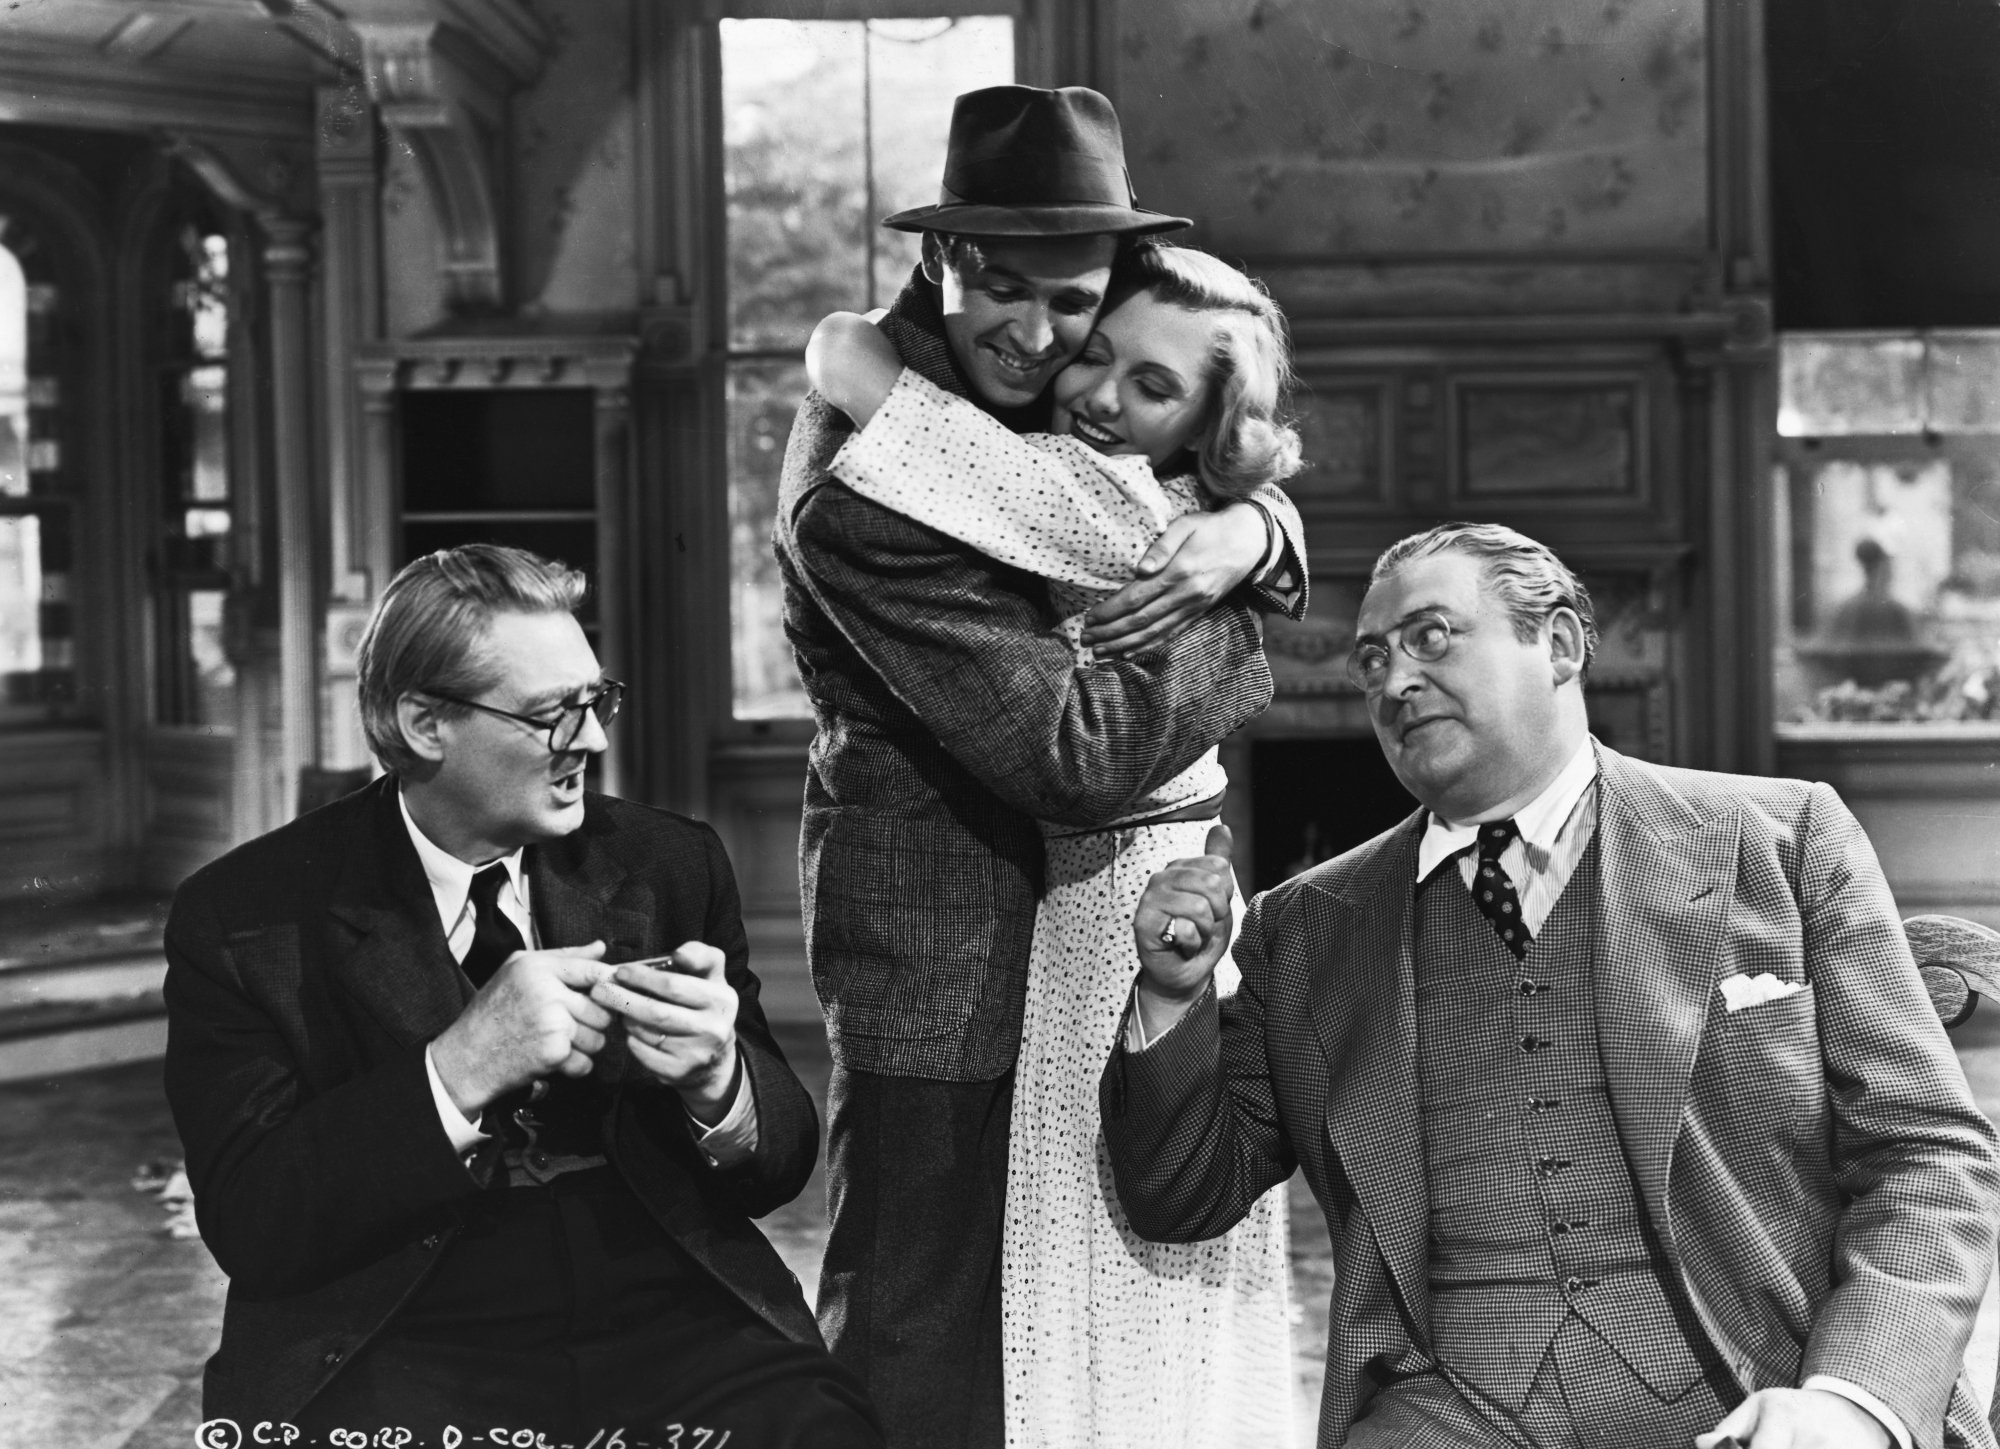 'You Can't Take It With You' Lionel Barrymore as Martin Vanderhof, Jimmy Stewart as Tony Kirby, Jean Arthur as Alice Sycamore, and Edward Arnold as Anthony Kirby sitting around a table with Stewart and Arthur hugging each other